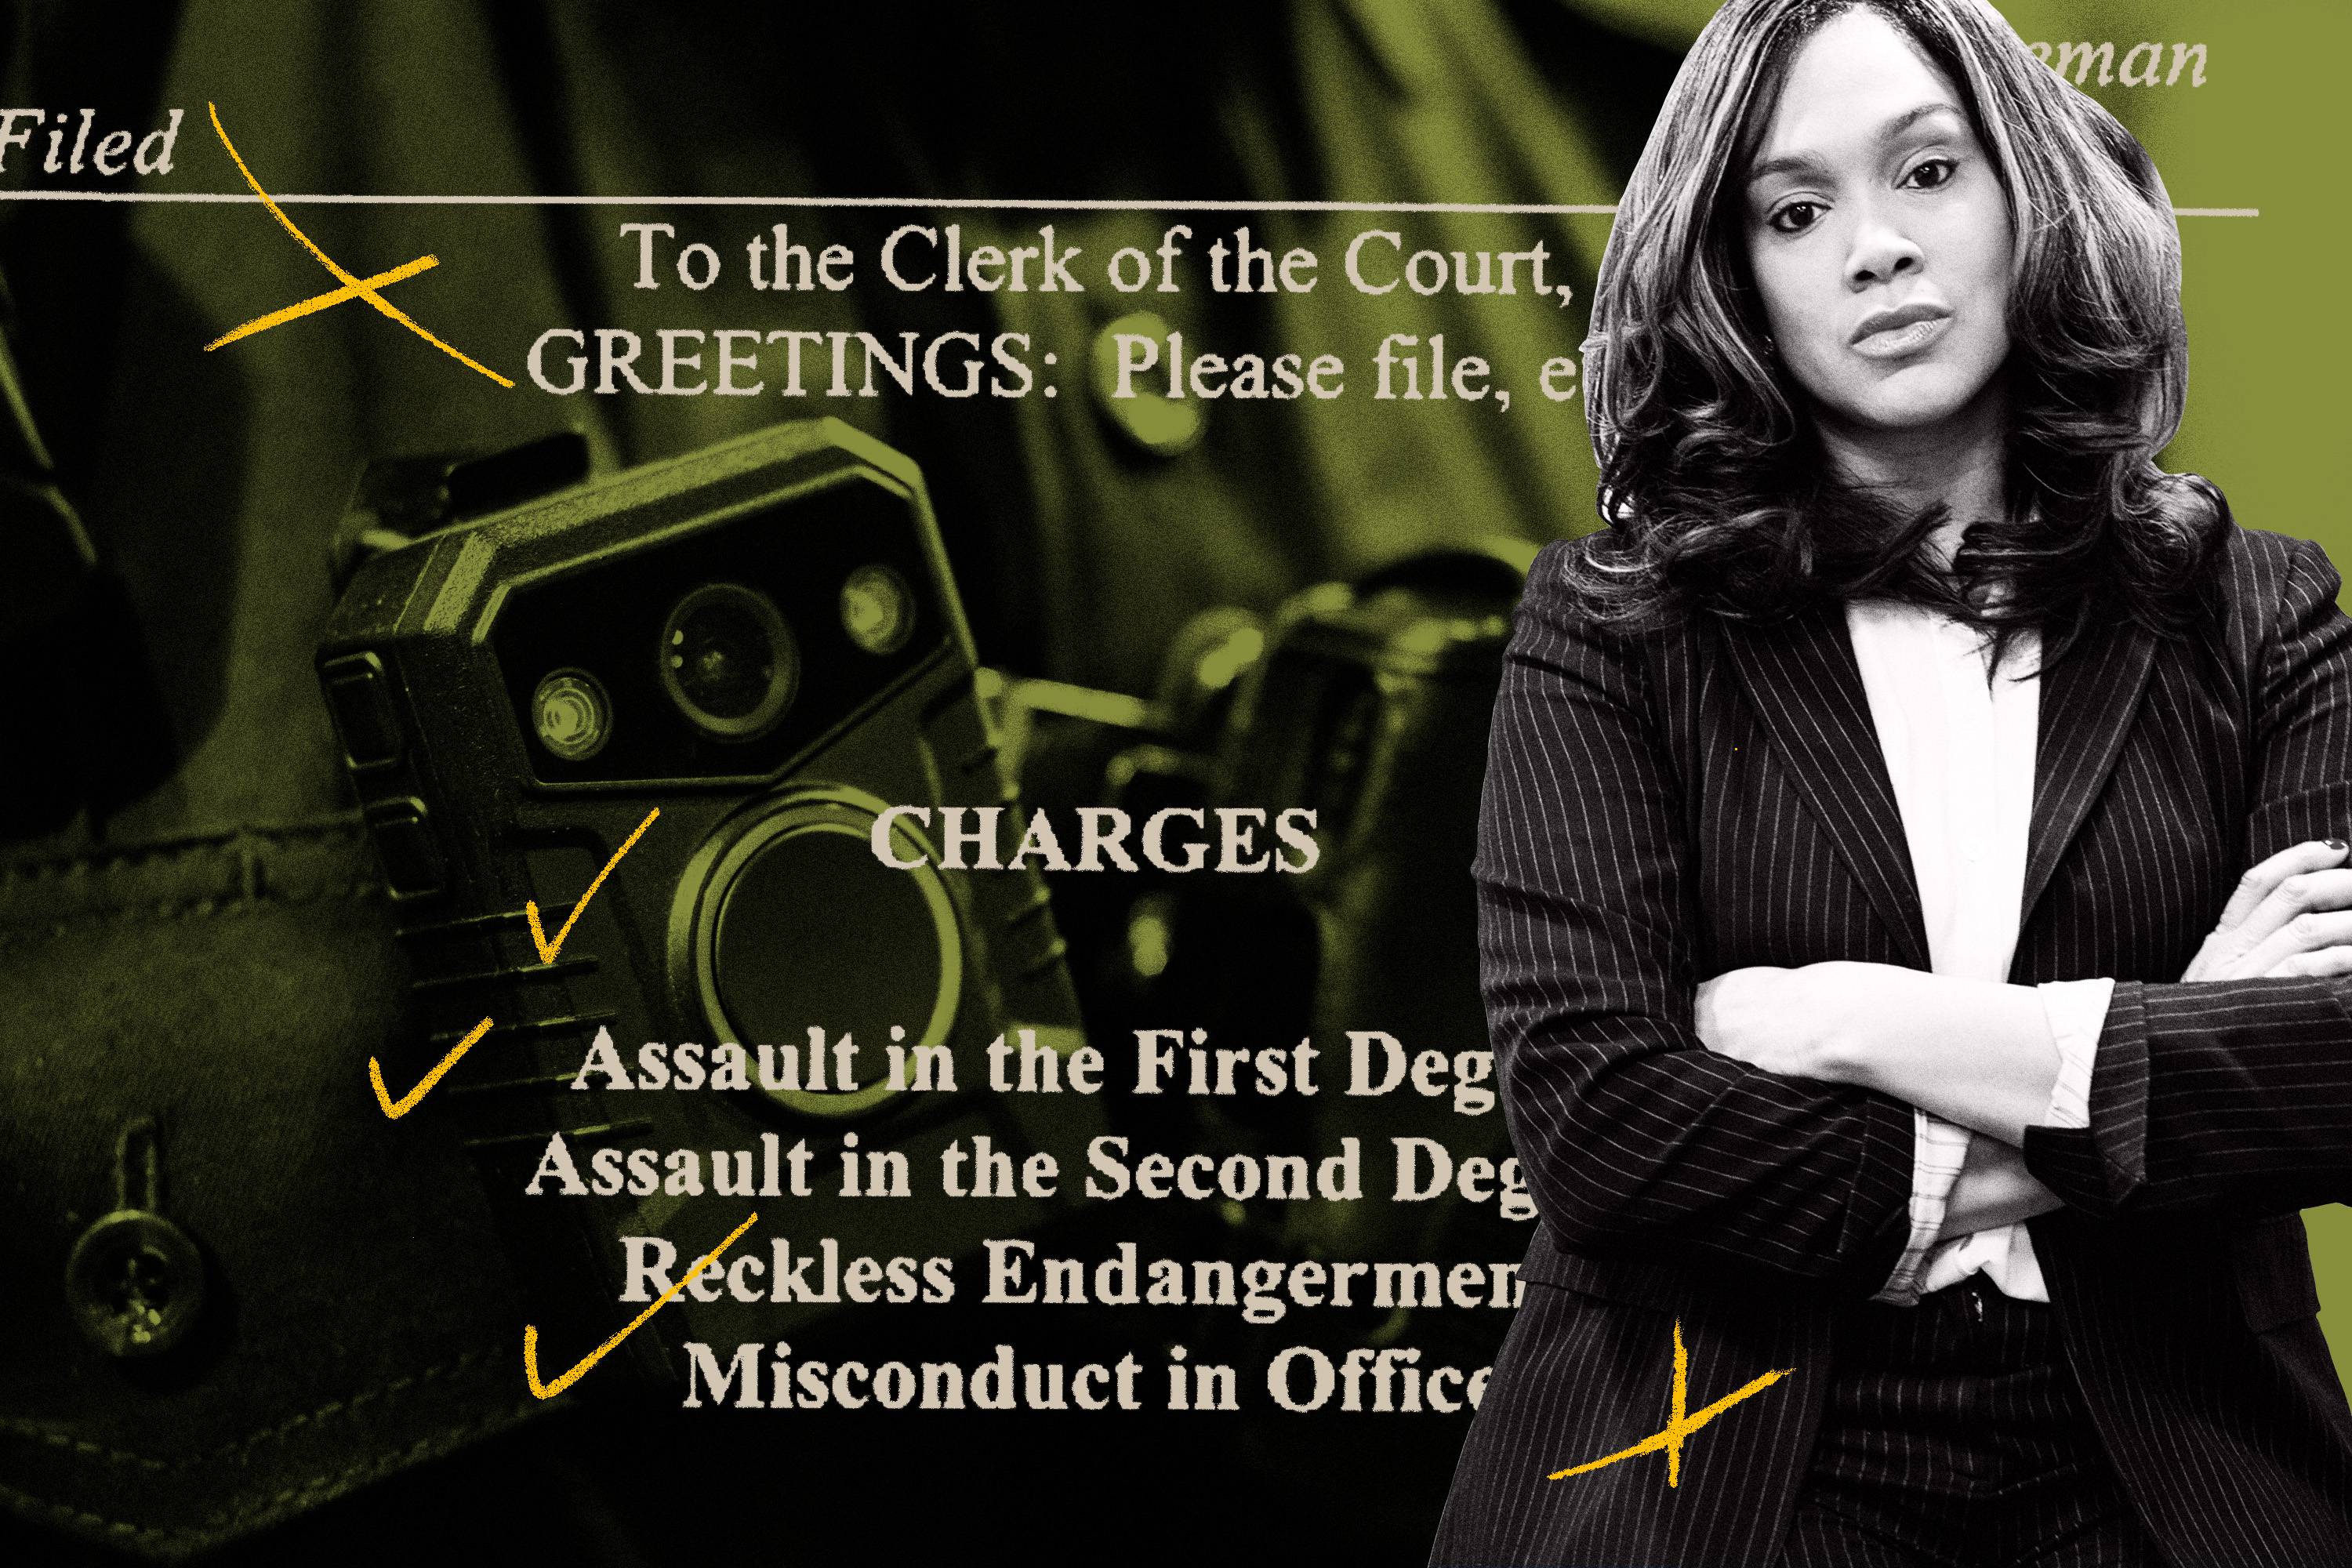 Marilyn Mosby, police body camera and list of charges against police officer